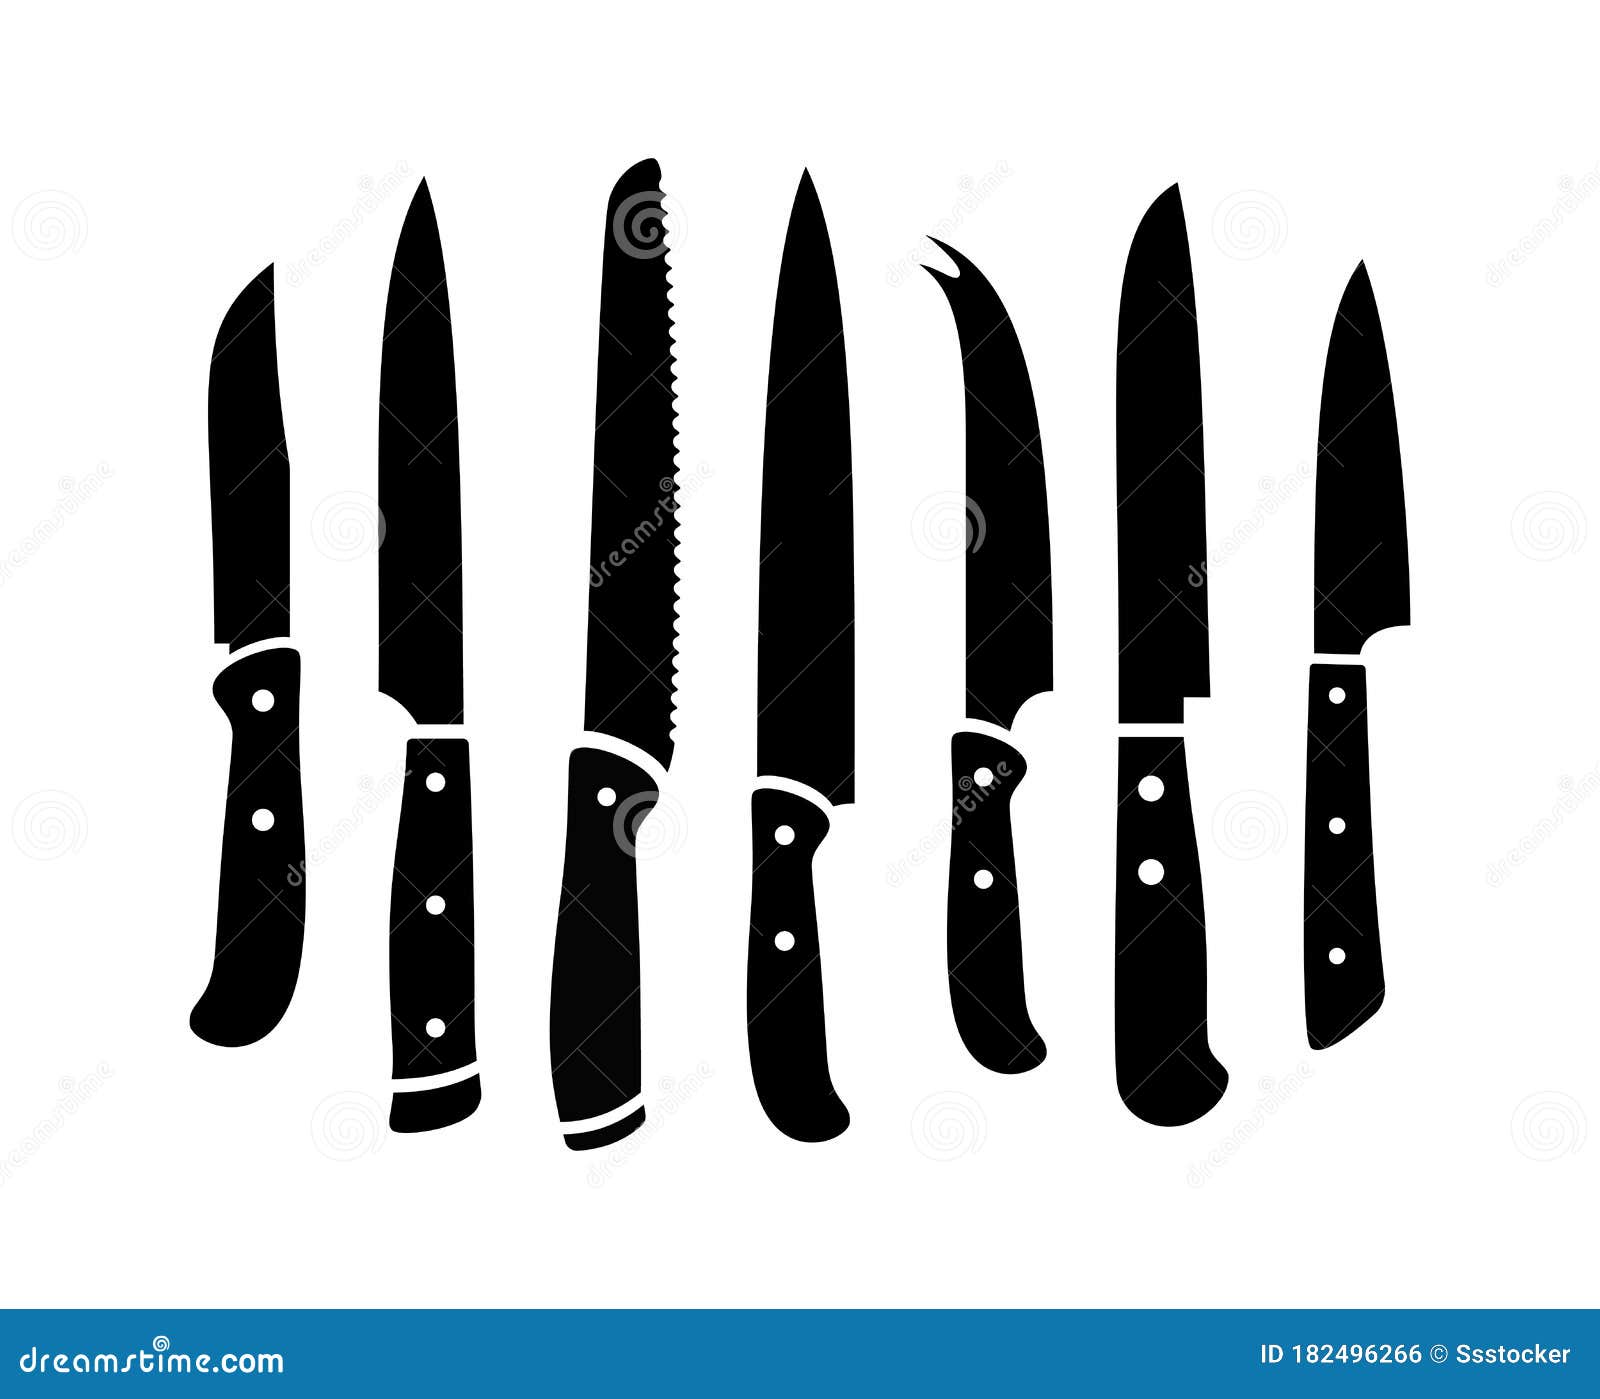 Kitchen Knives Black Silhouettes Stock Vector - Illustration of cooking